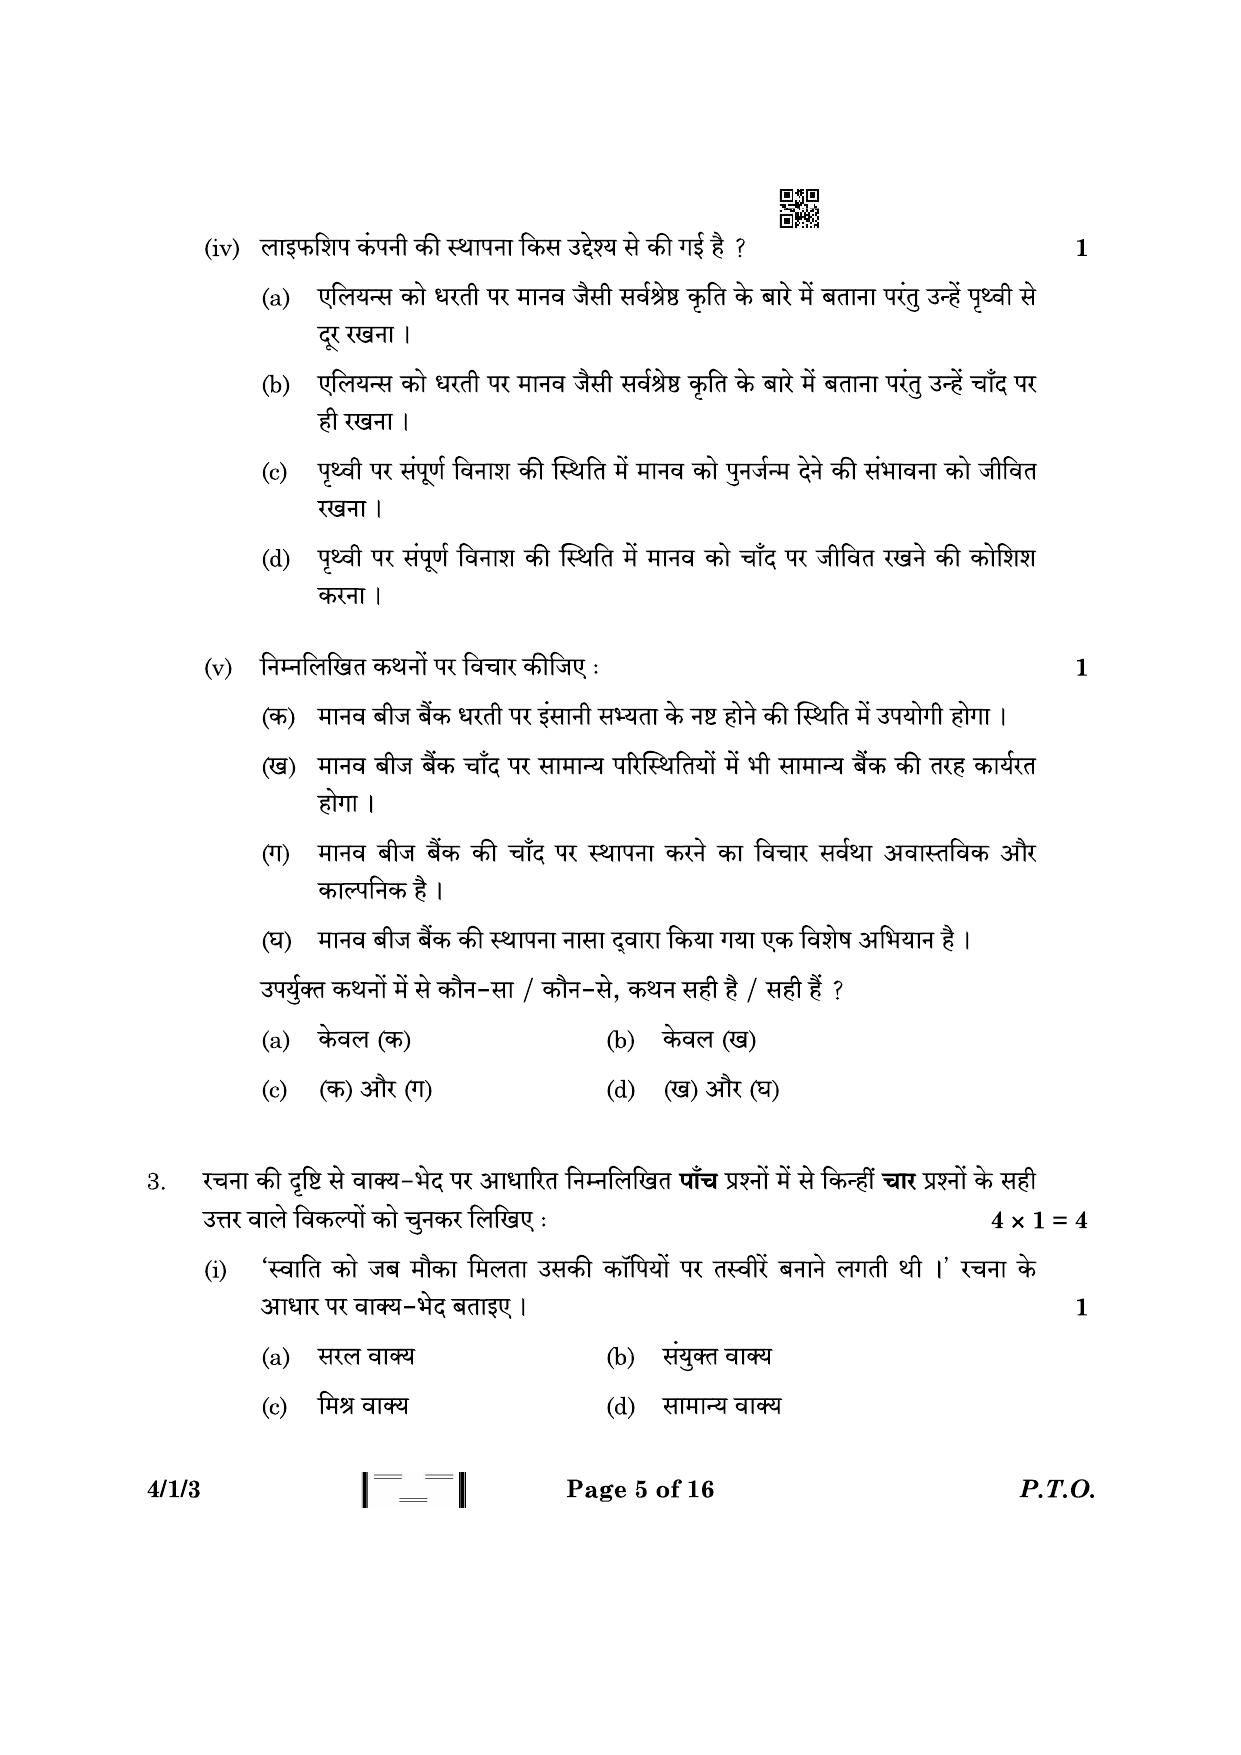 CBSE Class 10 4-1-3 Hindi B 2023 Question Paper - Page 5